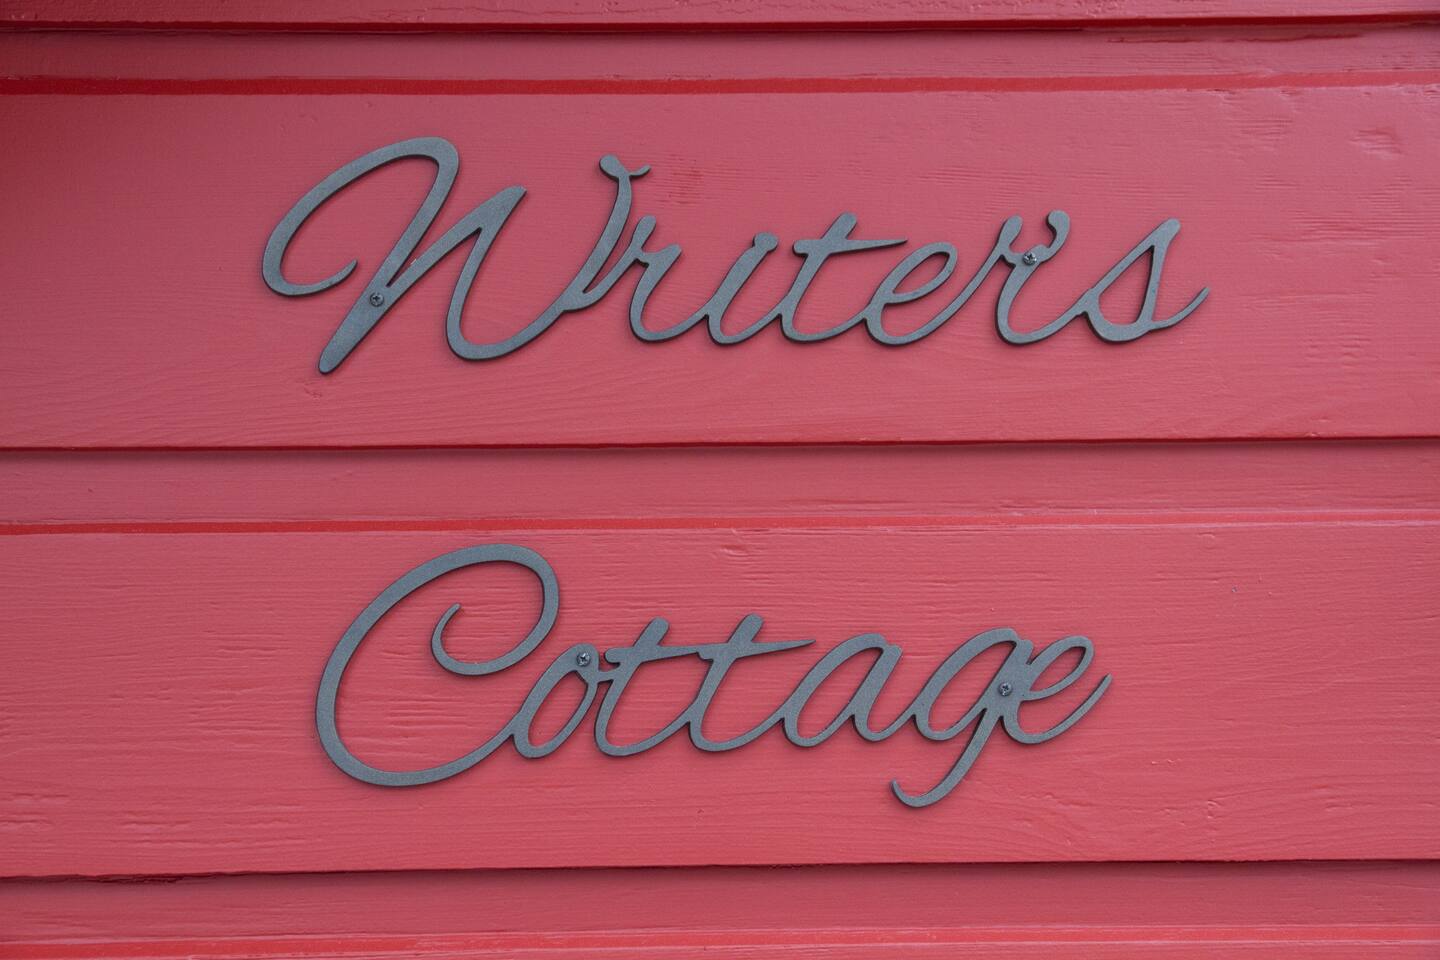 The Writer's Cottage